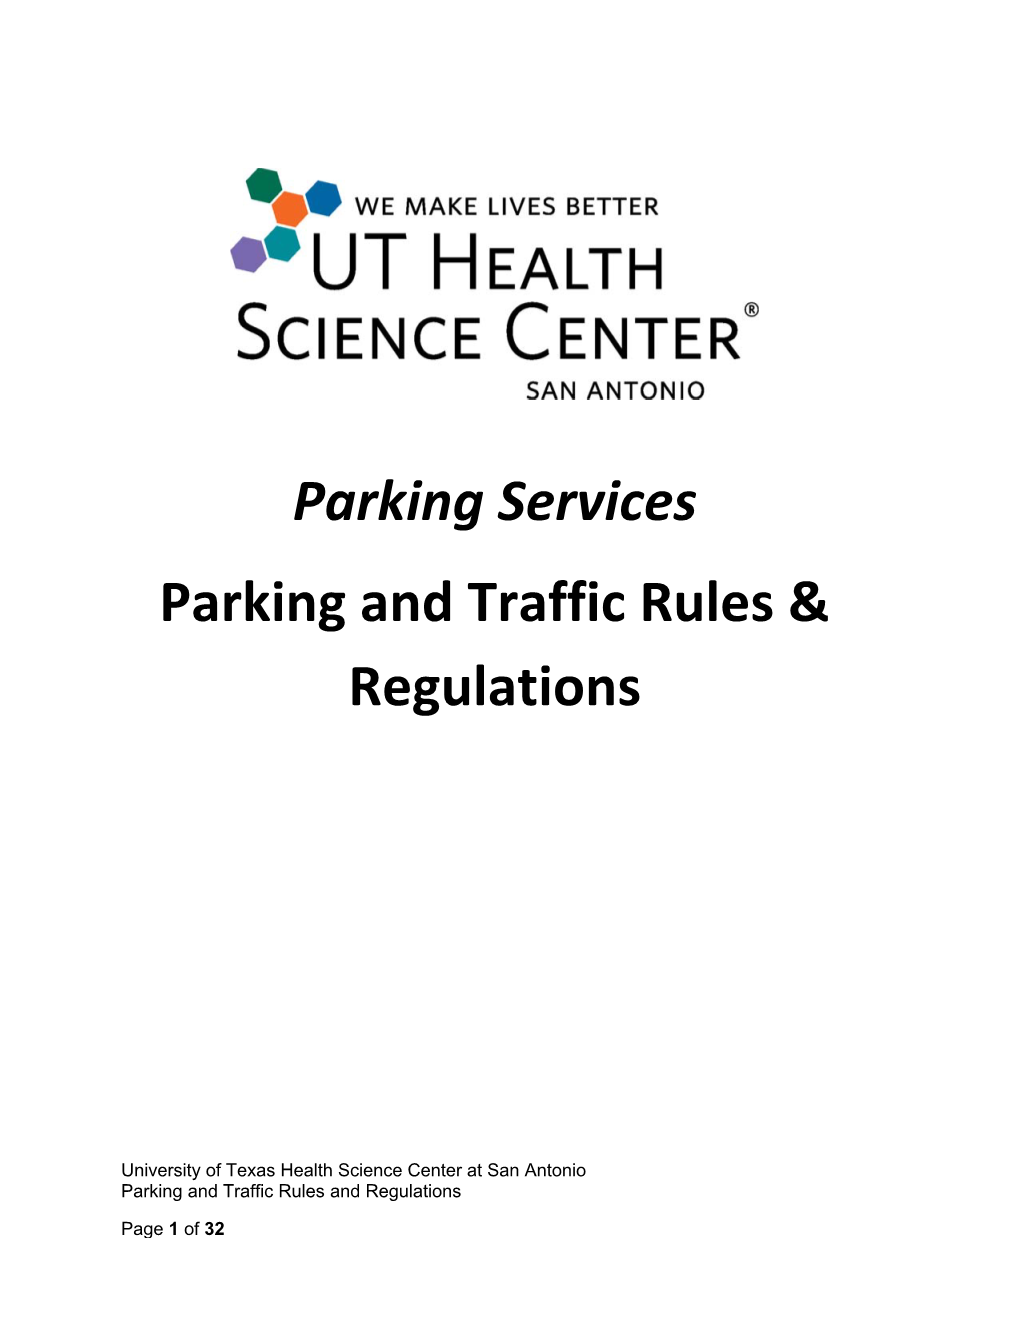 Parking and Traffic Rules & Regulations